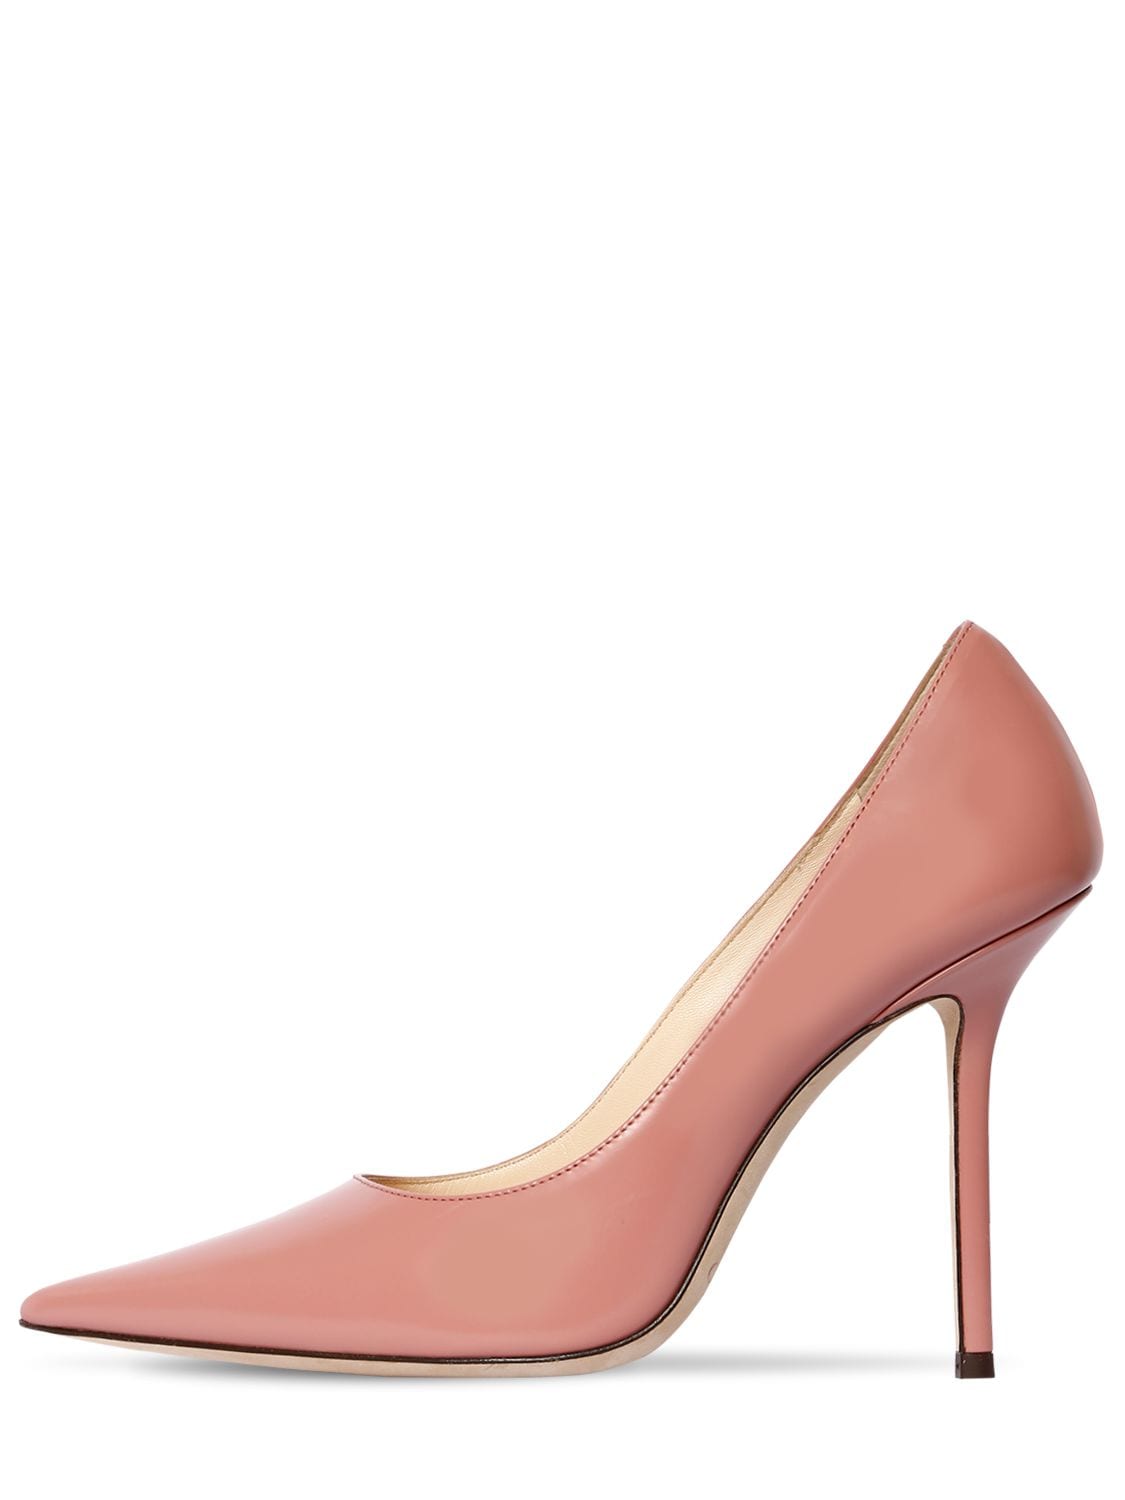 Jimmy Choo 100mm Love Brushed Leather Pumps In Blush